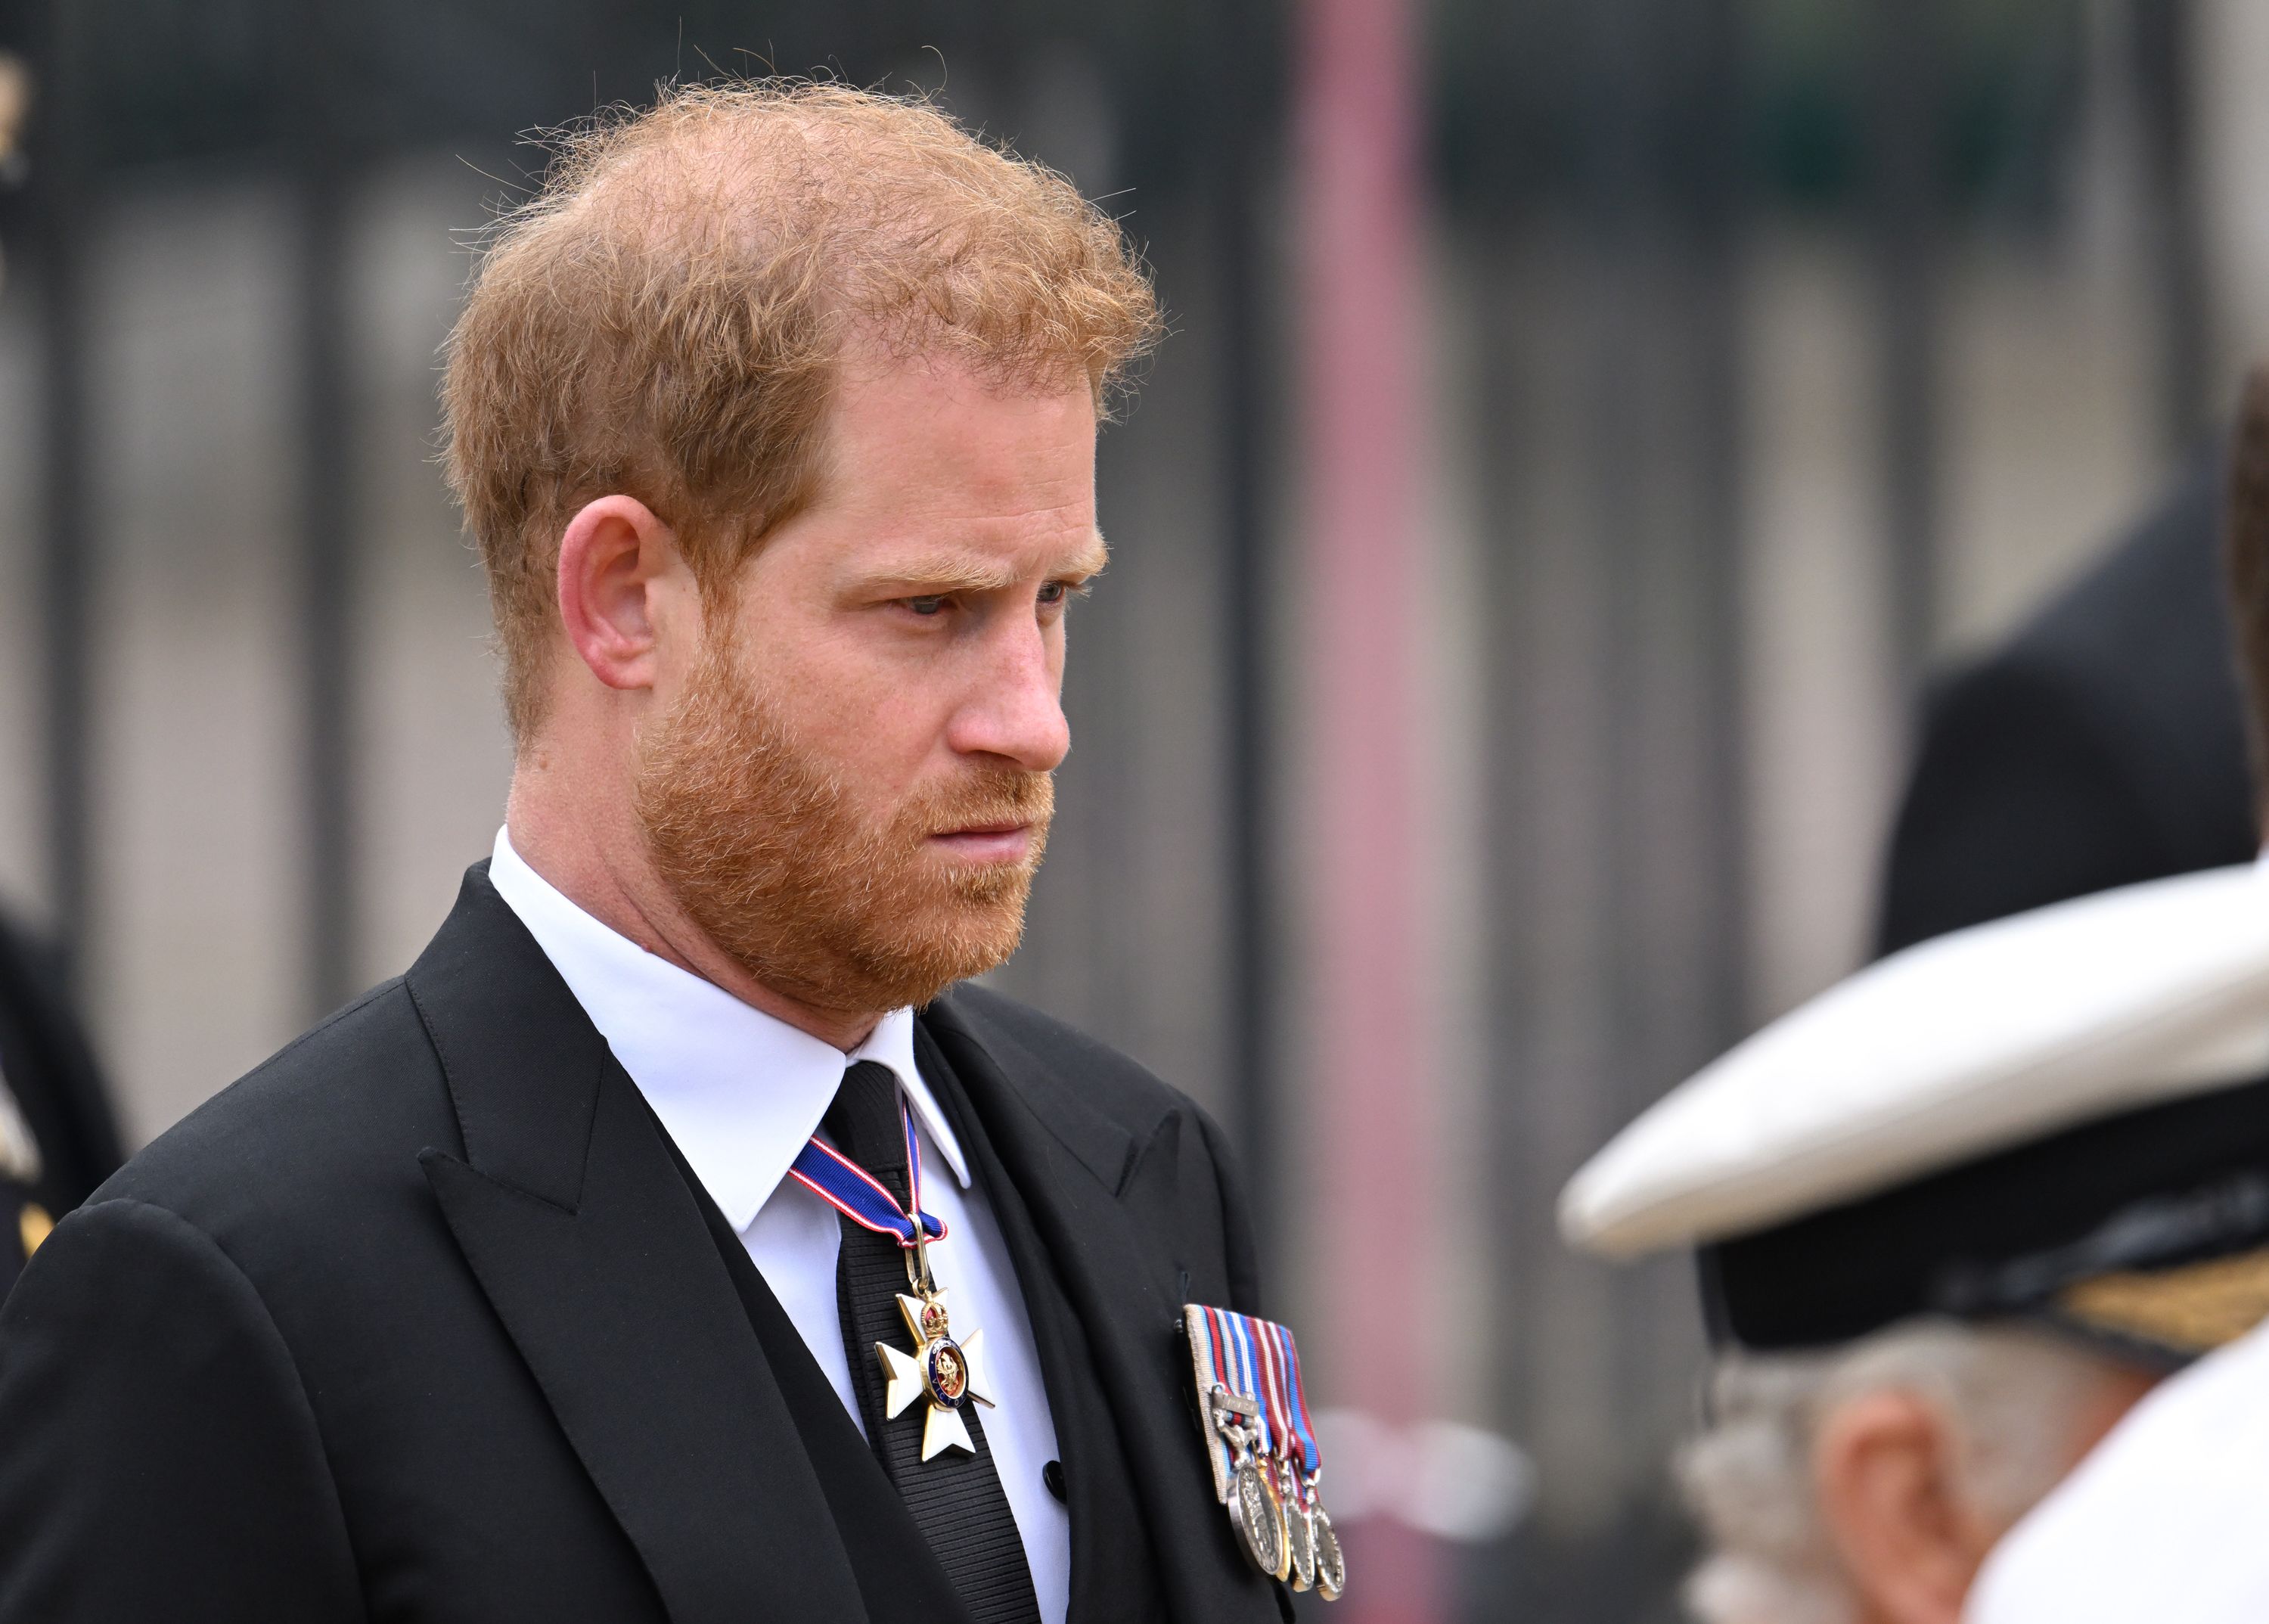 Spare: Key takeaways from Prince Harry's book | CNN